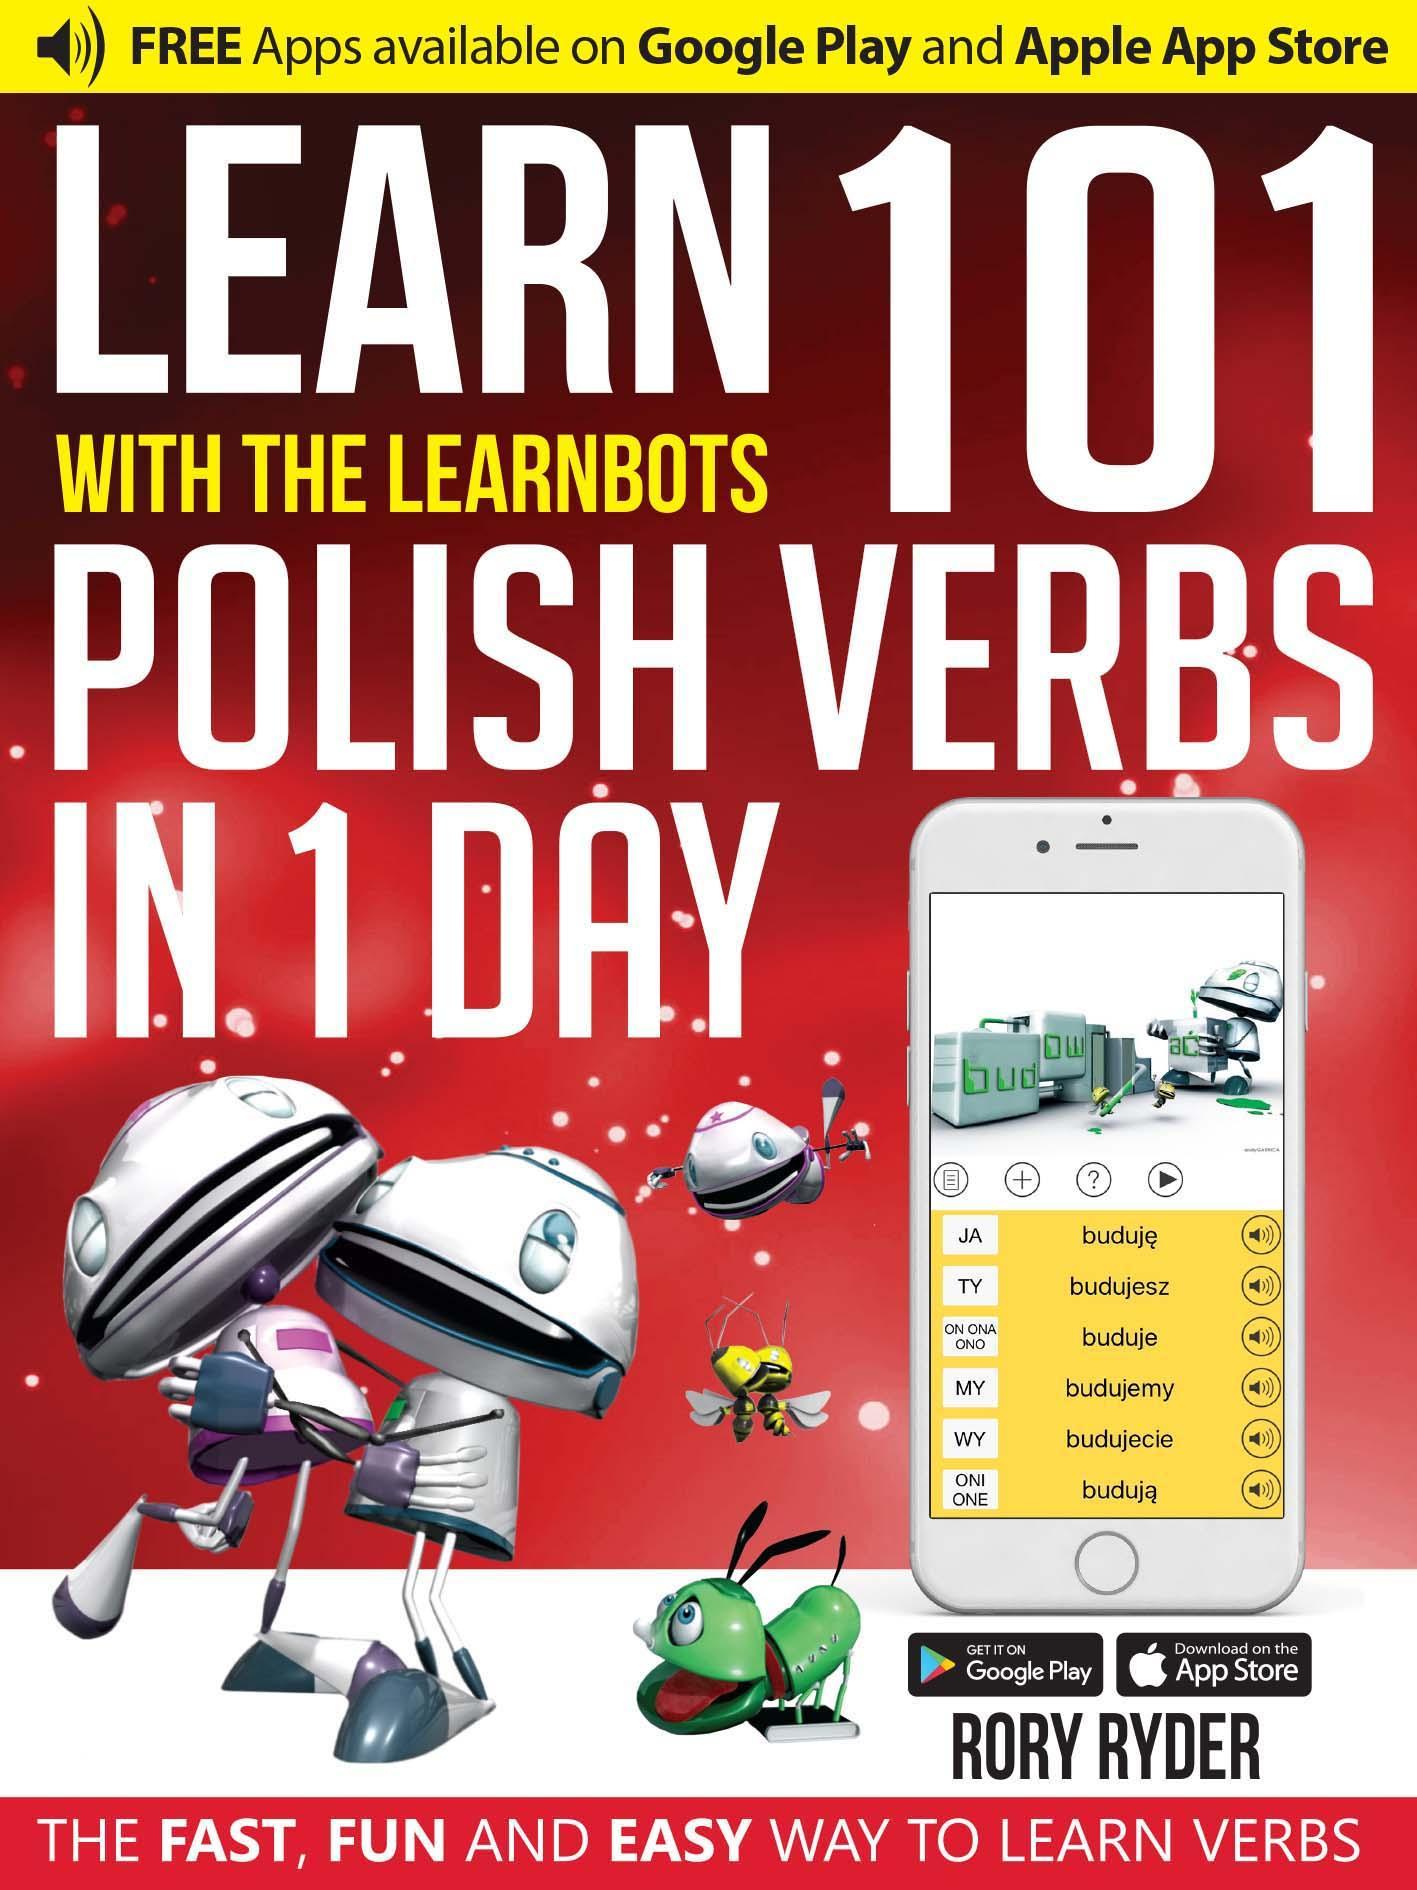 Learn 101 Polish Verbs in 1 Day with the Learnbots - Rory Ryder